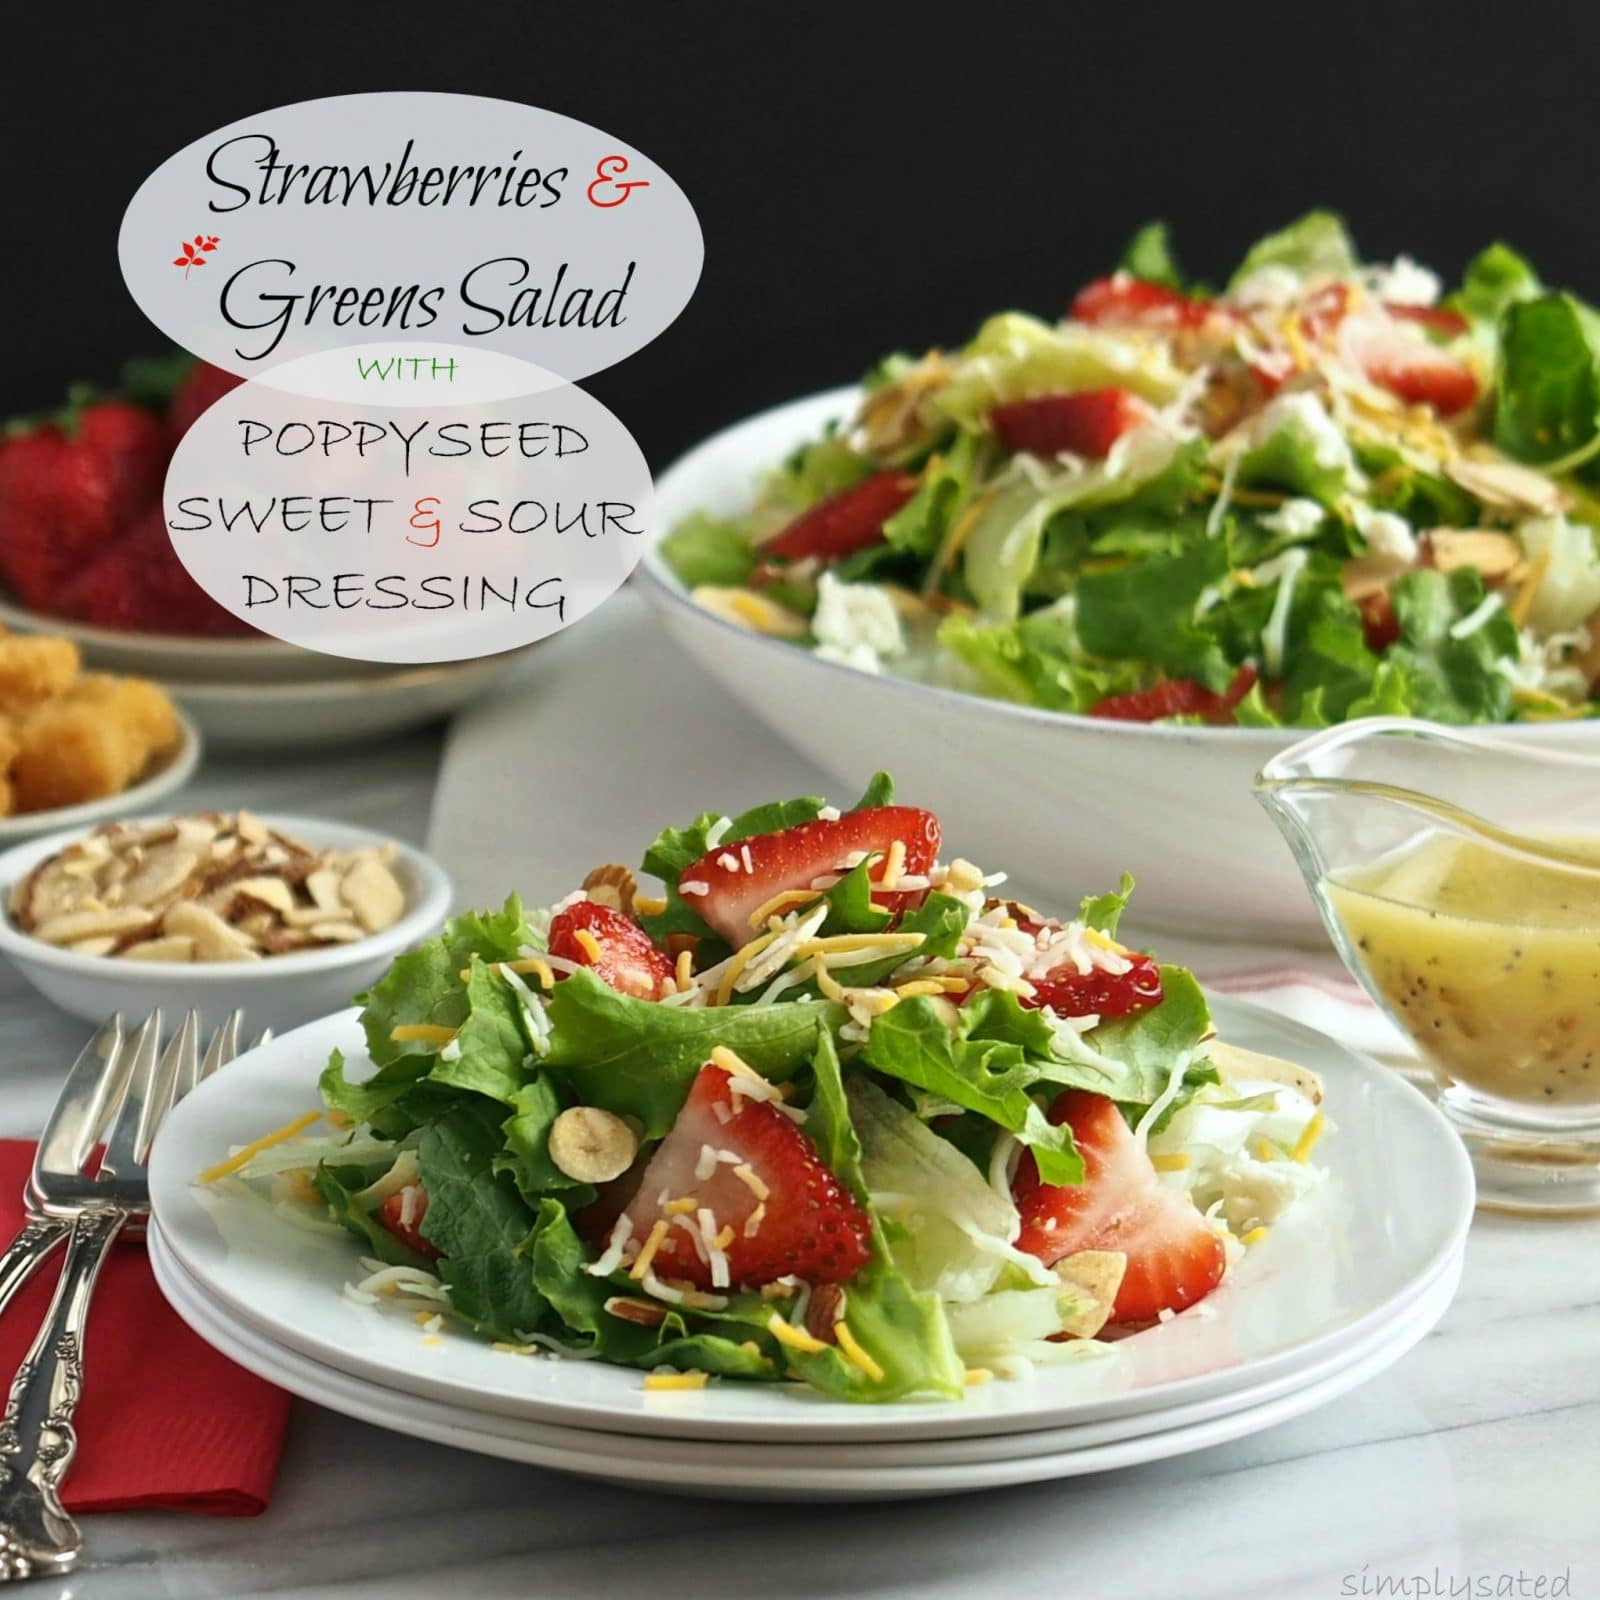 Strawberries & Greens Salad has stood the test of time. Strawberries, greens, sugared almonds, cheese with poppy seed sweet & sour dressing & croutons. Simply Sated